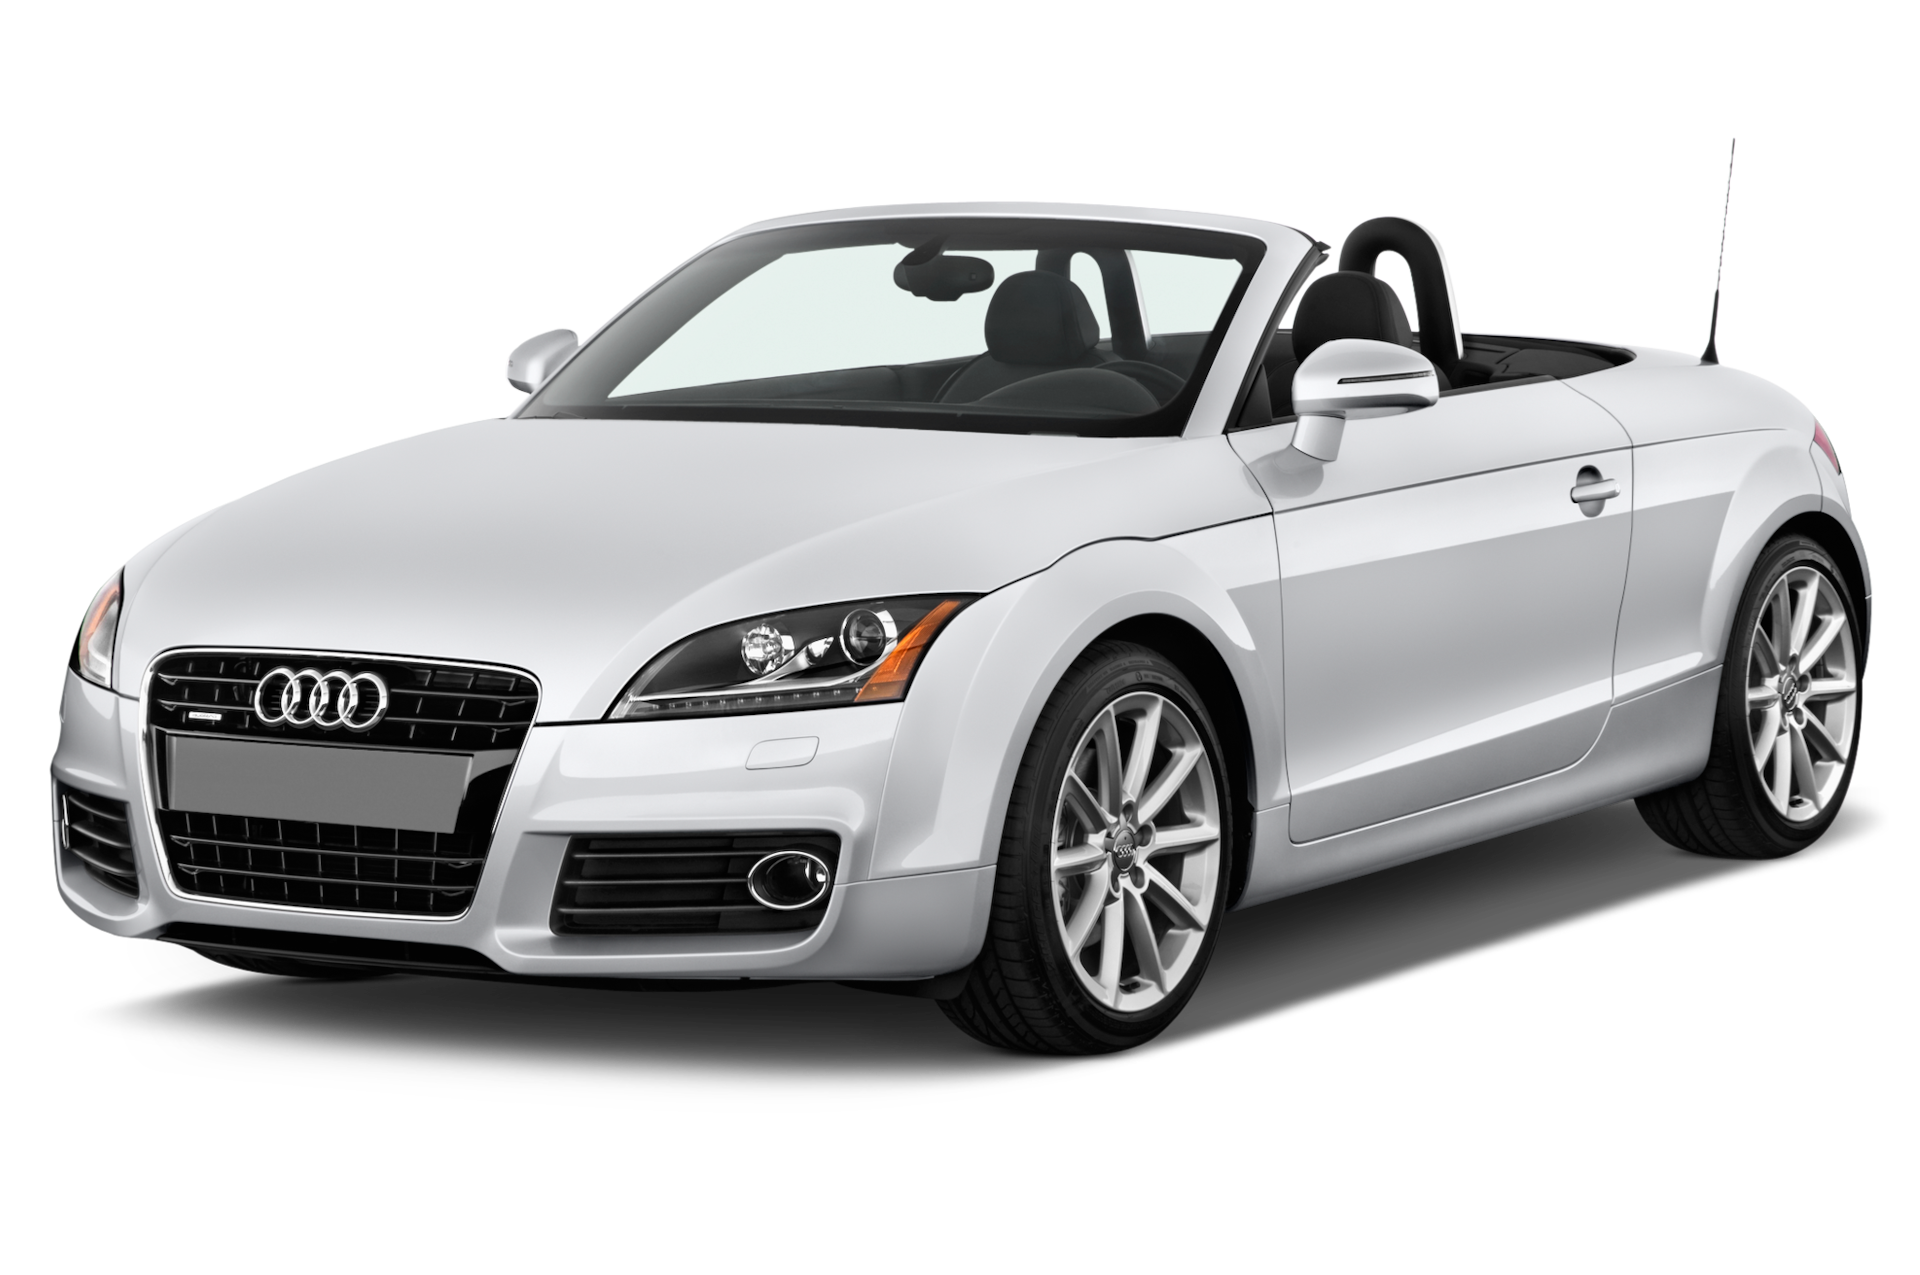 2012 Audi TTS Prices, Reviews, and Photos - MotorTrend